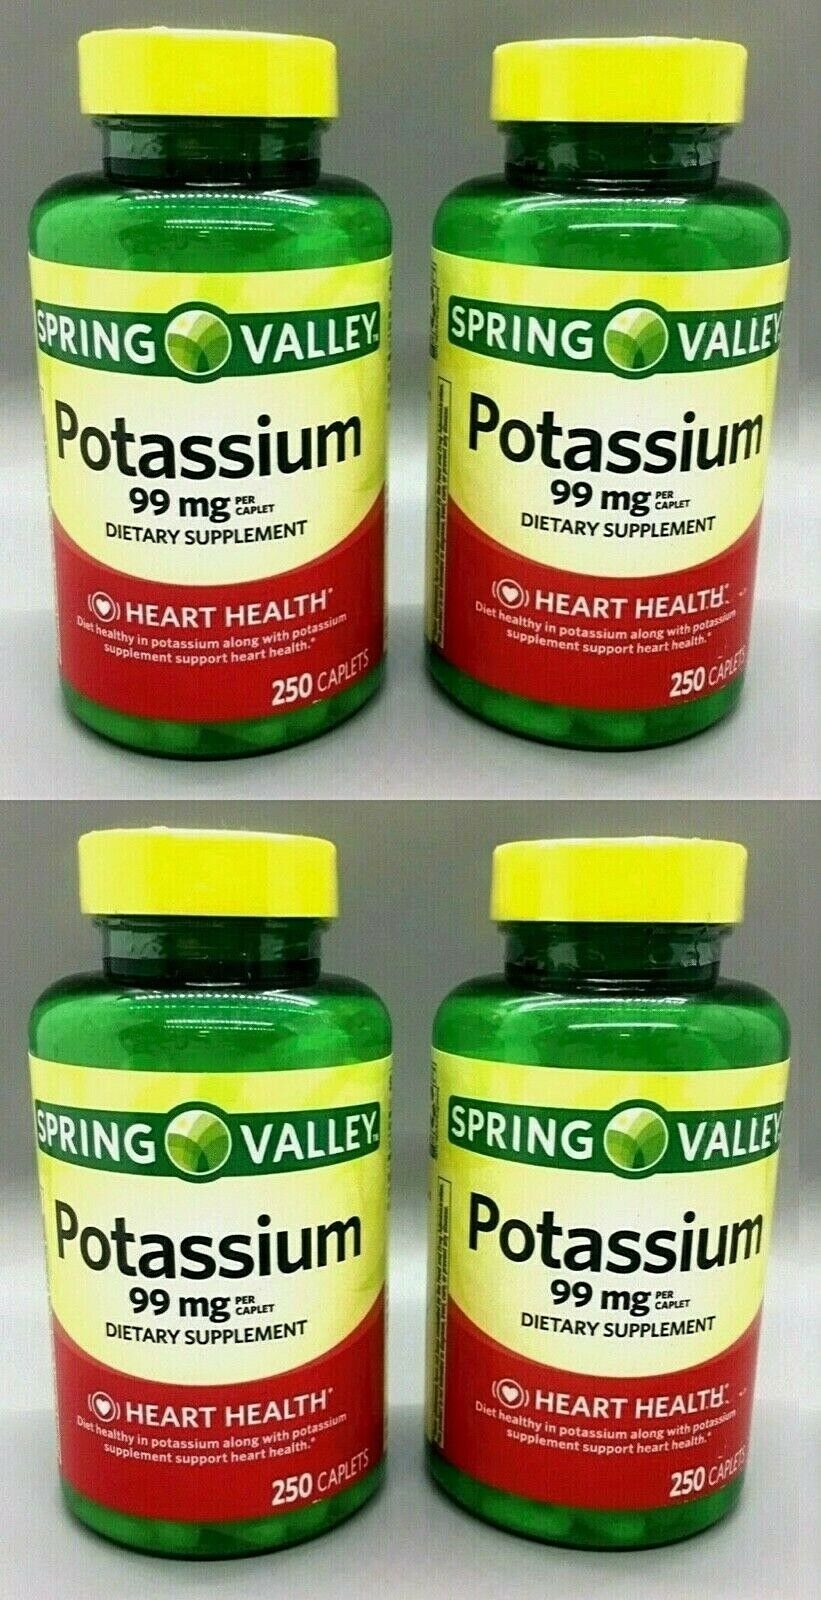 Spring Valley Potassium 99mg Heart Health 250 Caplets (4 Pack) Exp 1/24+ Spring Valley N/A